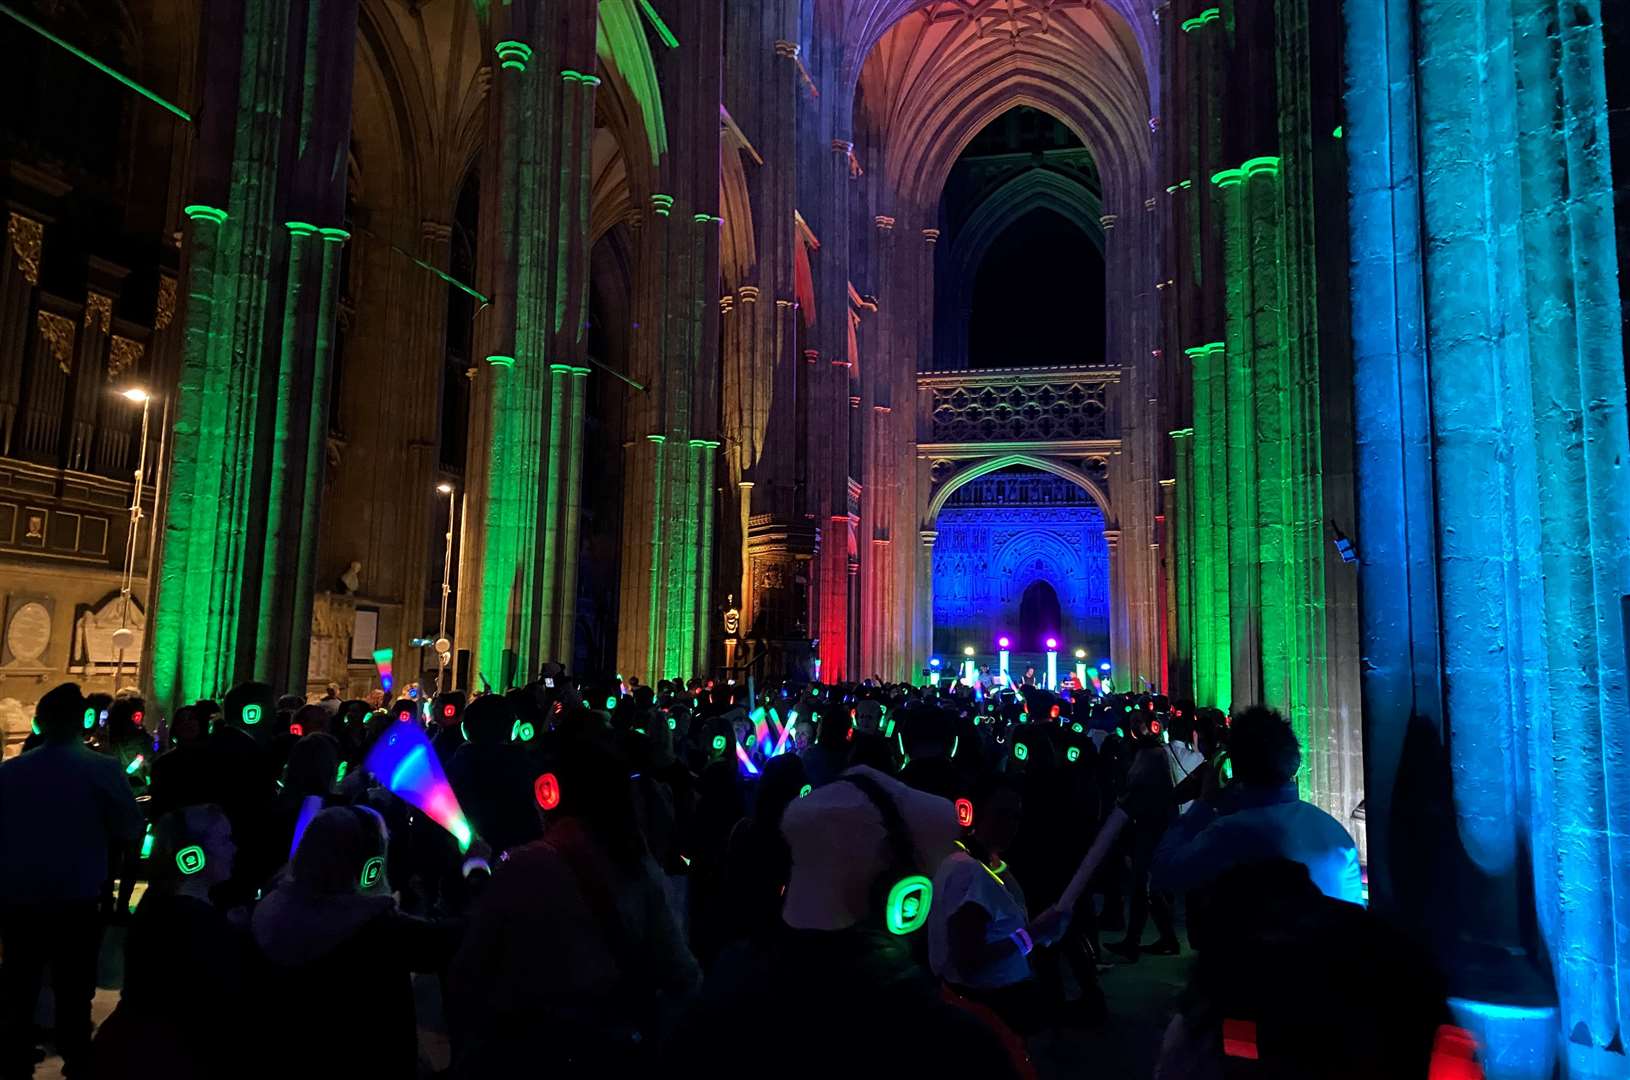 There were huge crowds at the silent discos within Canterbury Cathedral’s nave